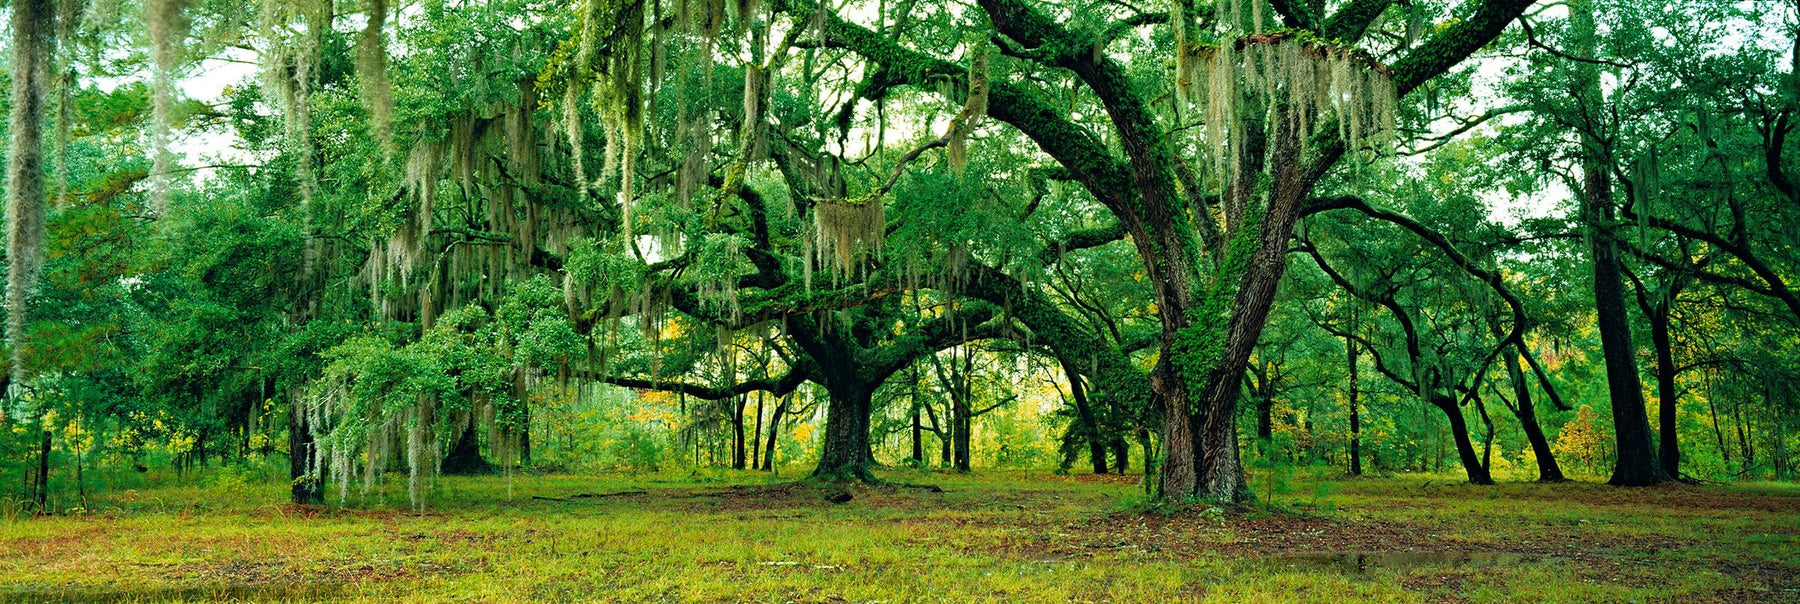 Moss hanging from a forest of giant Oak trees in Fontainebleau State Park Louisiana